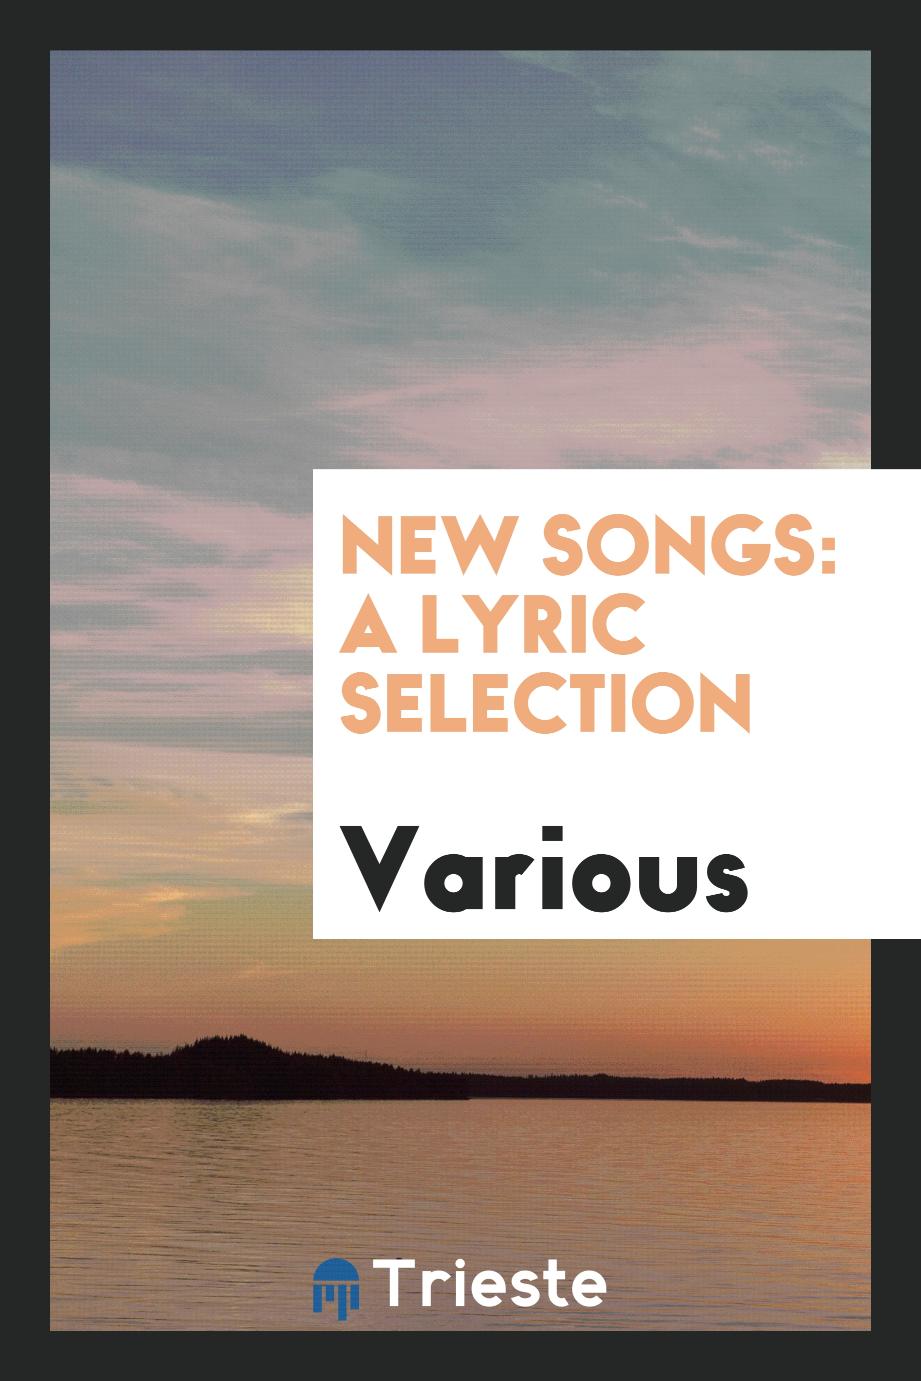 New Songs: A Lyric Selection